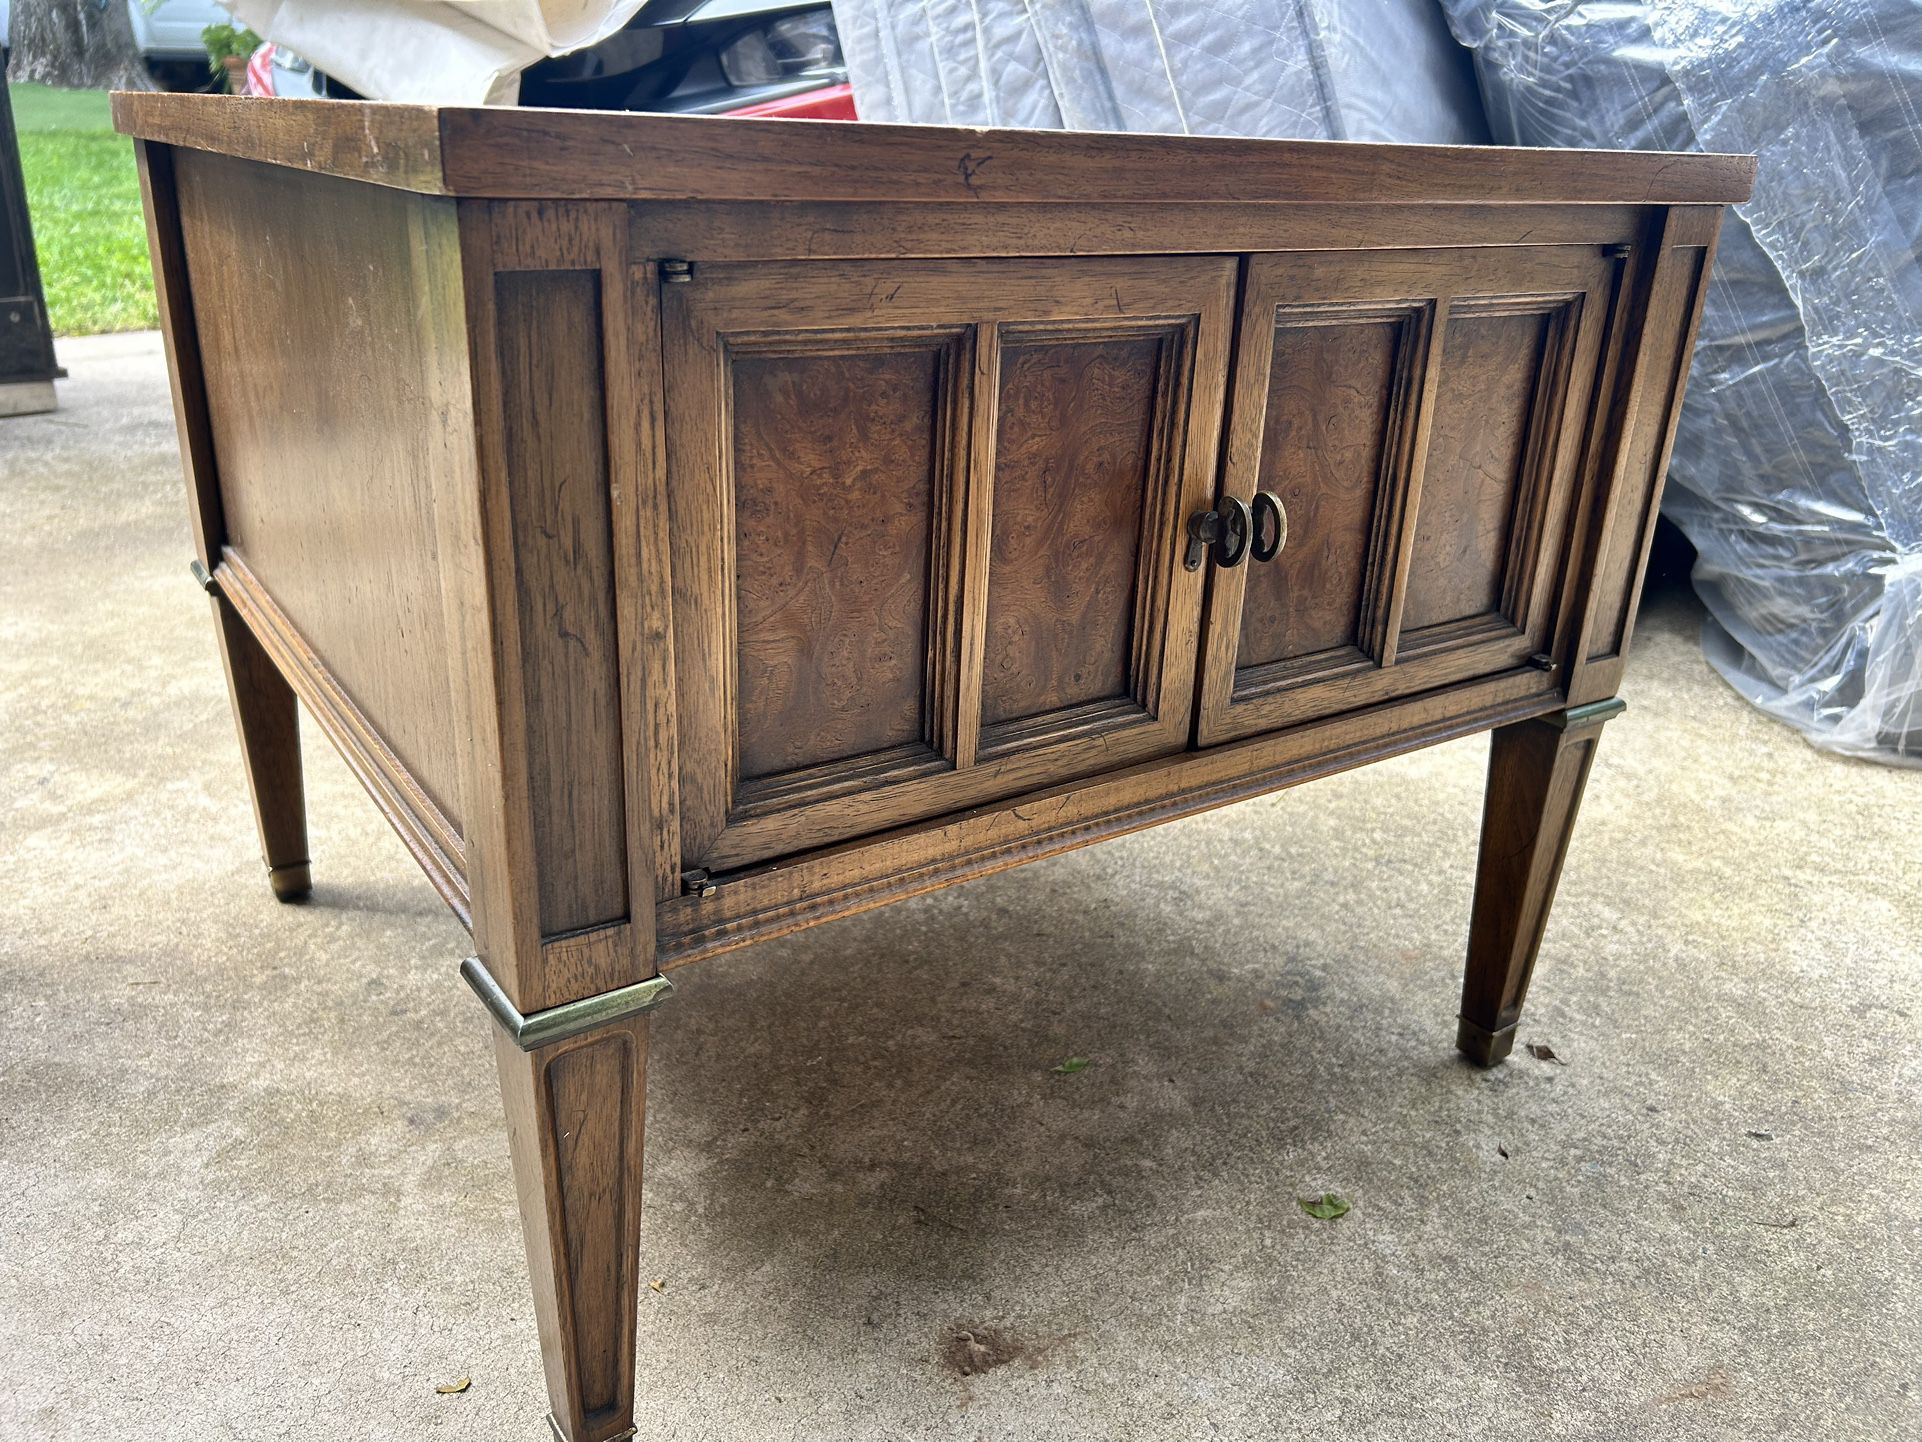 End Table $20